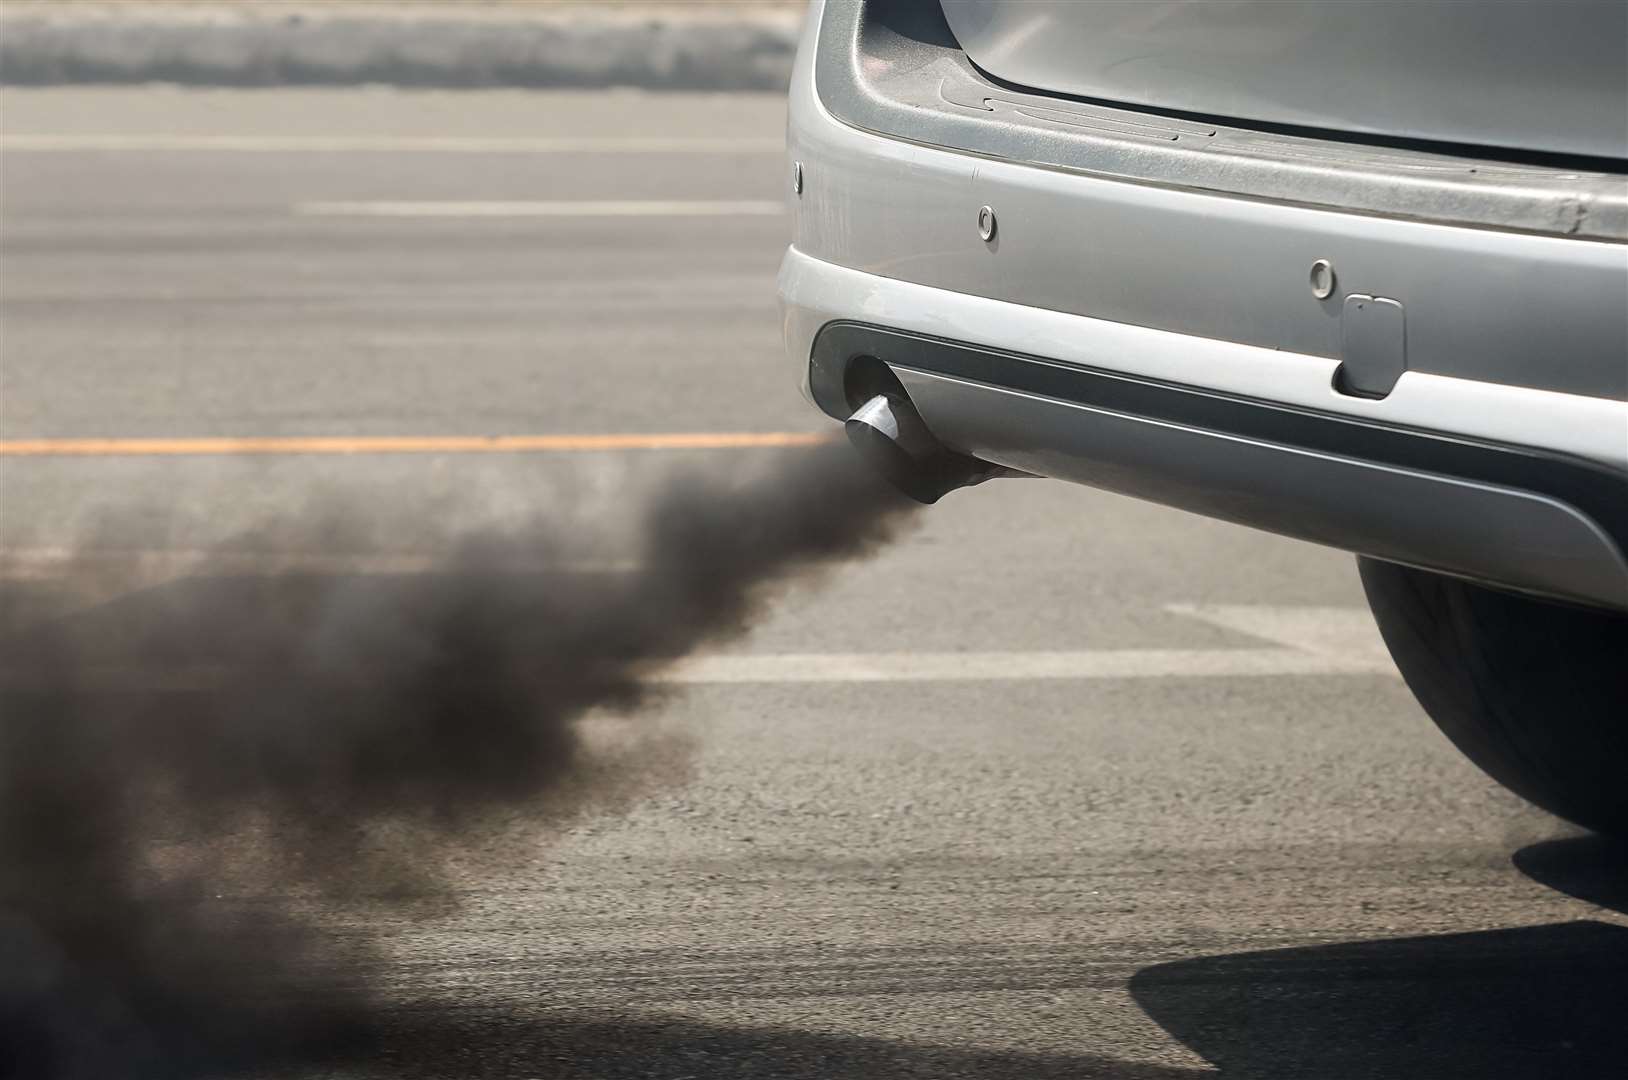 Air Quality Management Areas have been declared on to busy roads